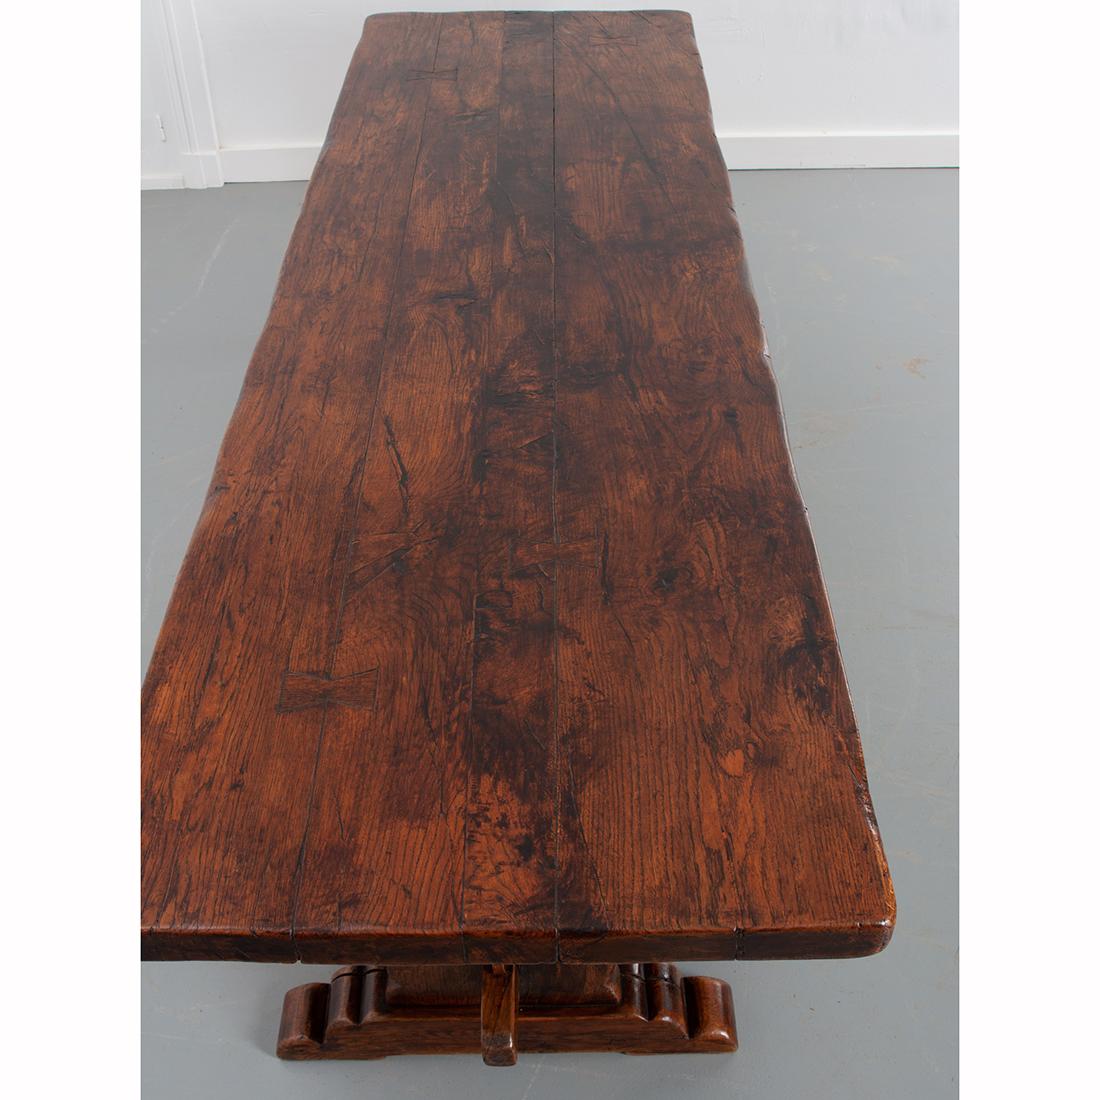 Large slabs of solid oak were used to create this stunning, French oak trestle table. The primitive, 2-½” thick oak has achieved a remarkable patina over the course of its lifetime. Two shapely vertical supports are joined by a stretcher below the